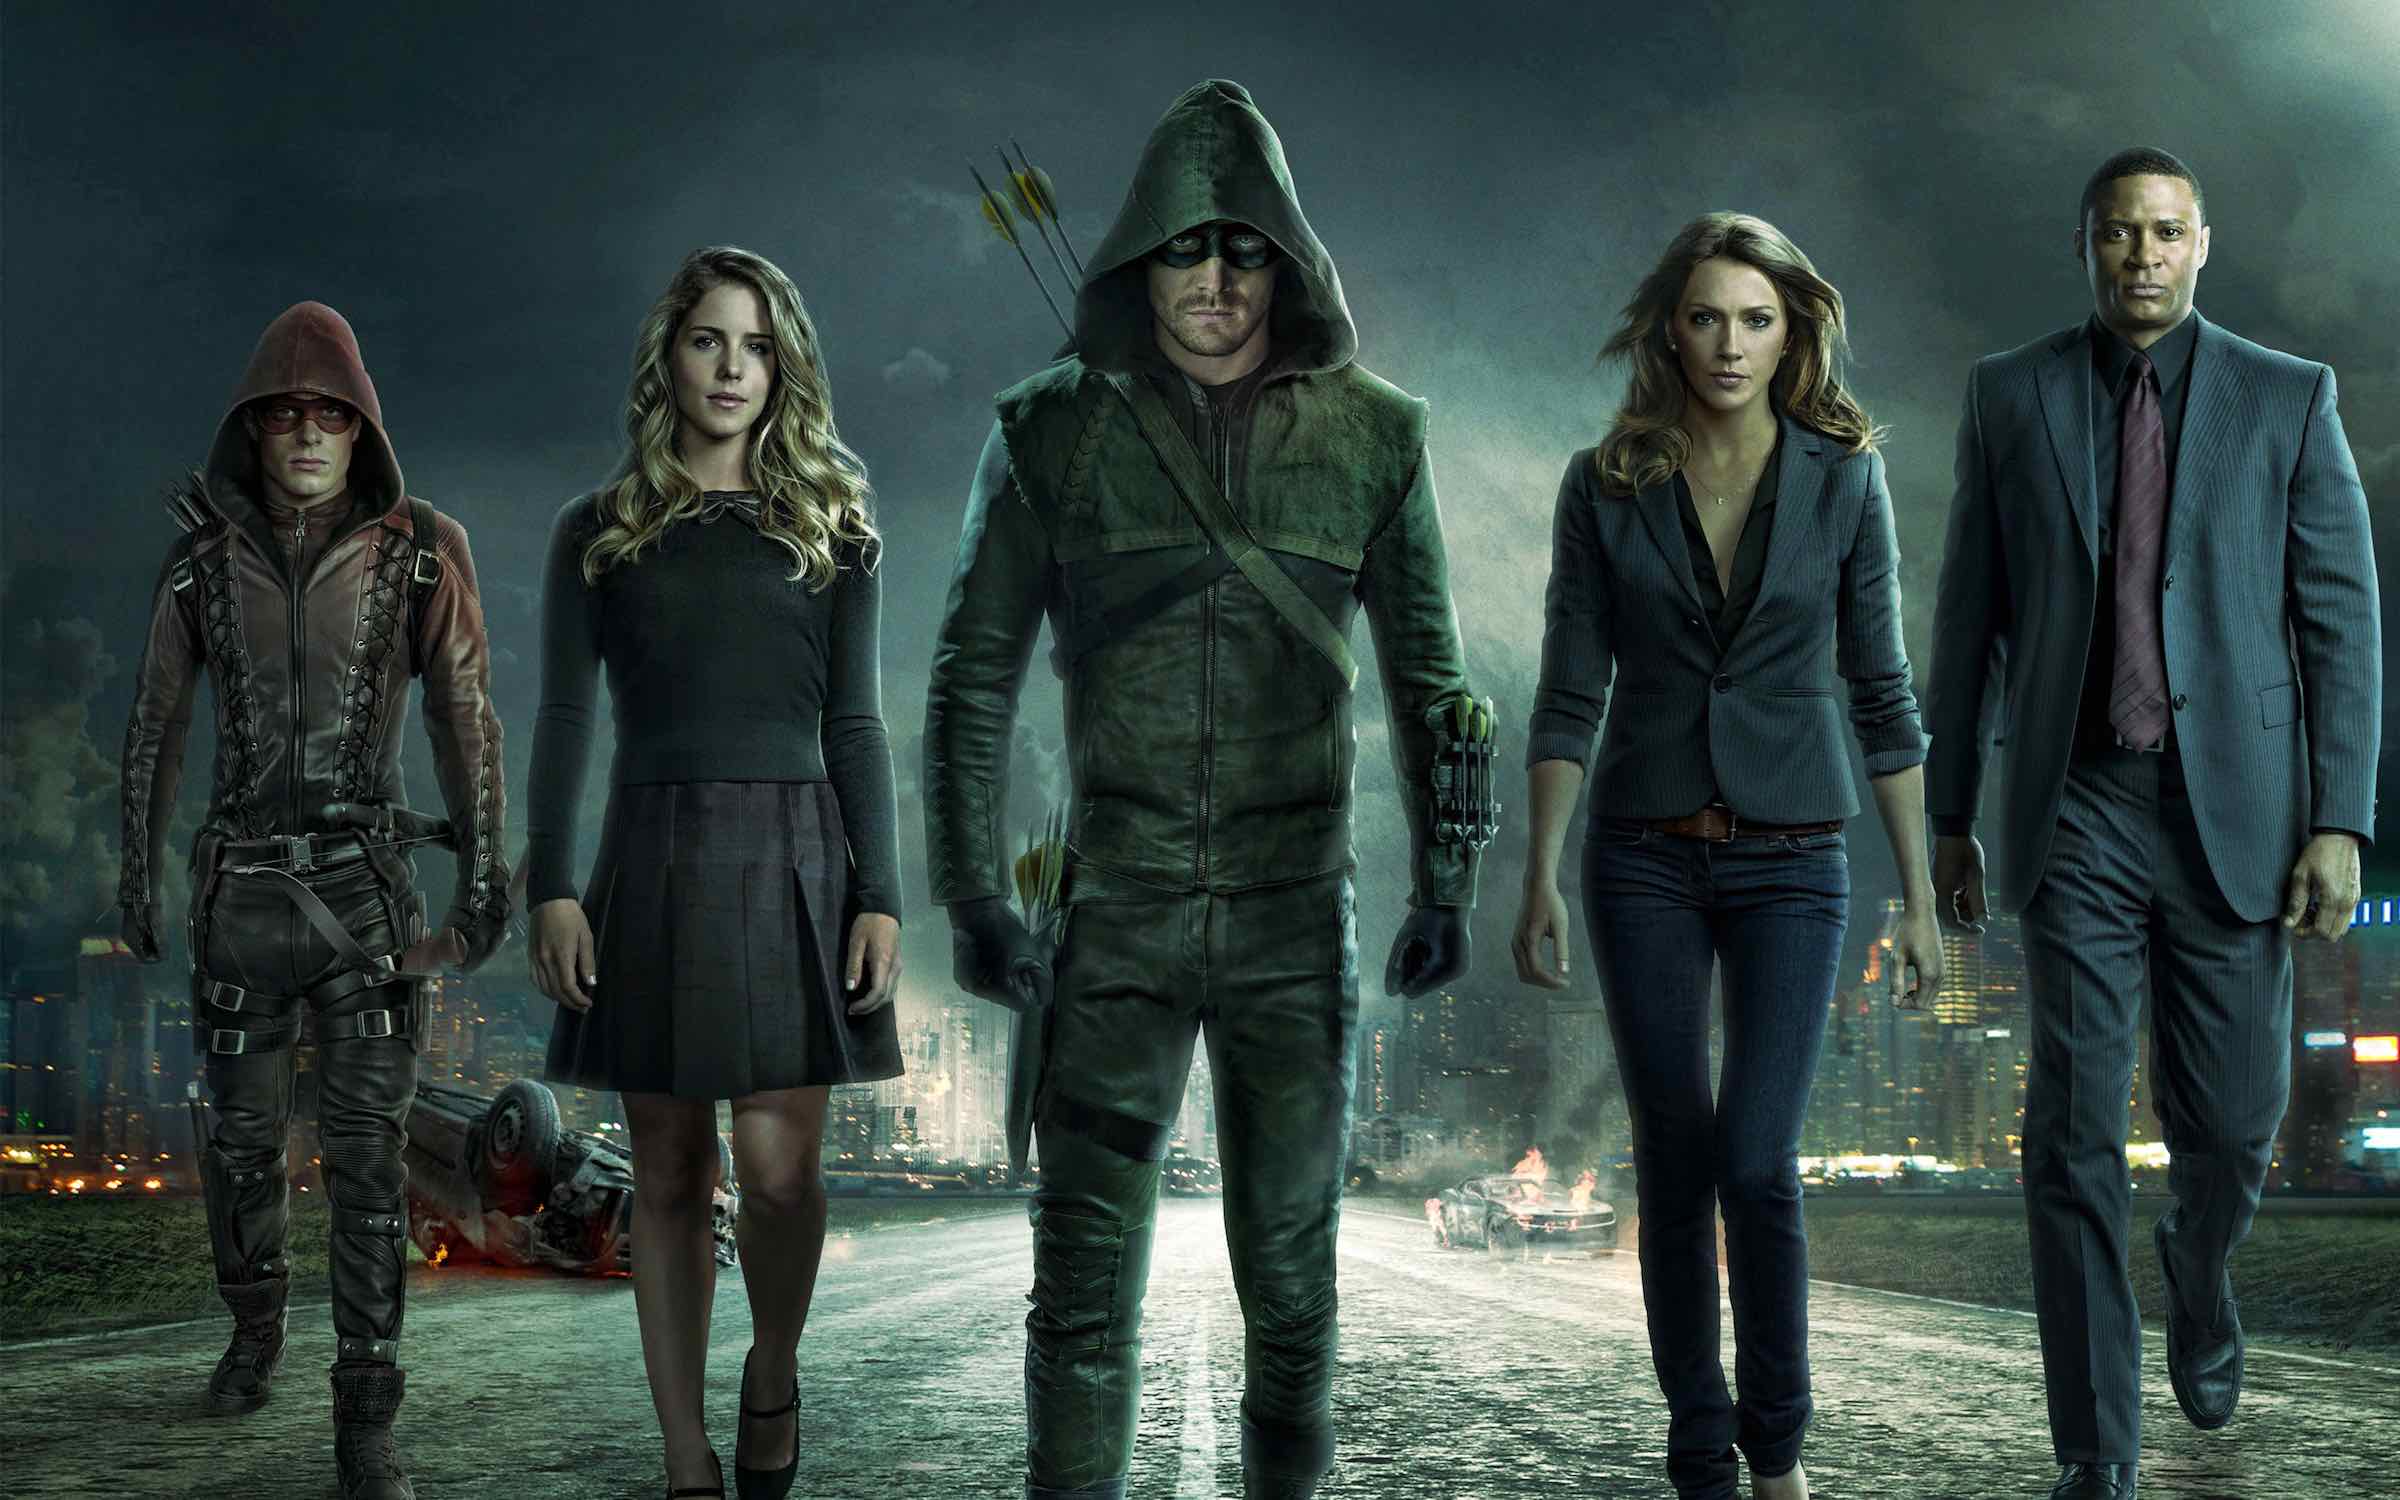 Let's take a look at the best Arrowverse quotes that truly define 'Arrow' and its characters and maybe inspire the hero in all of us.